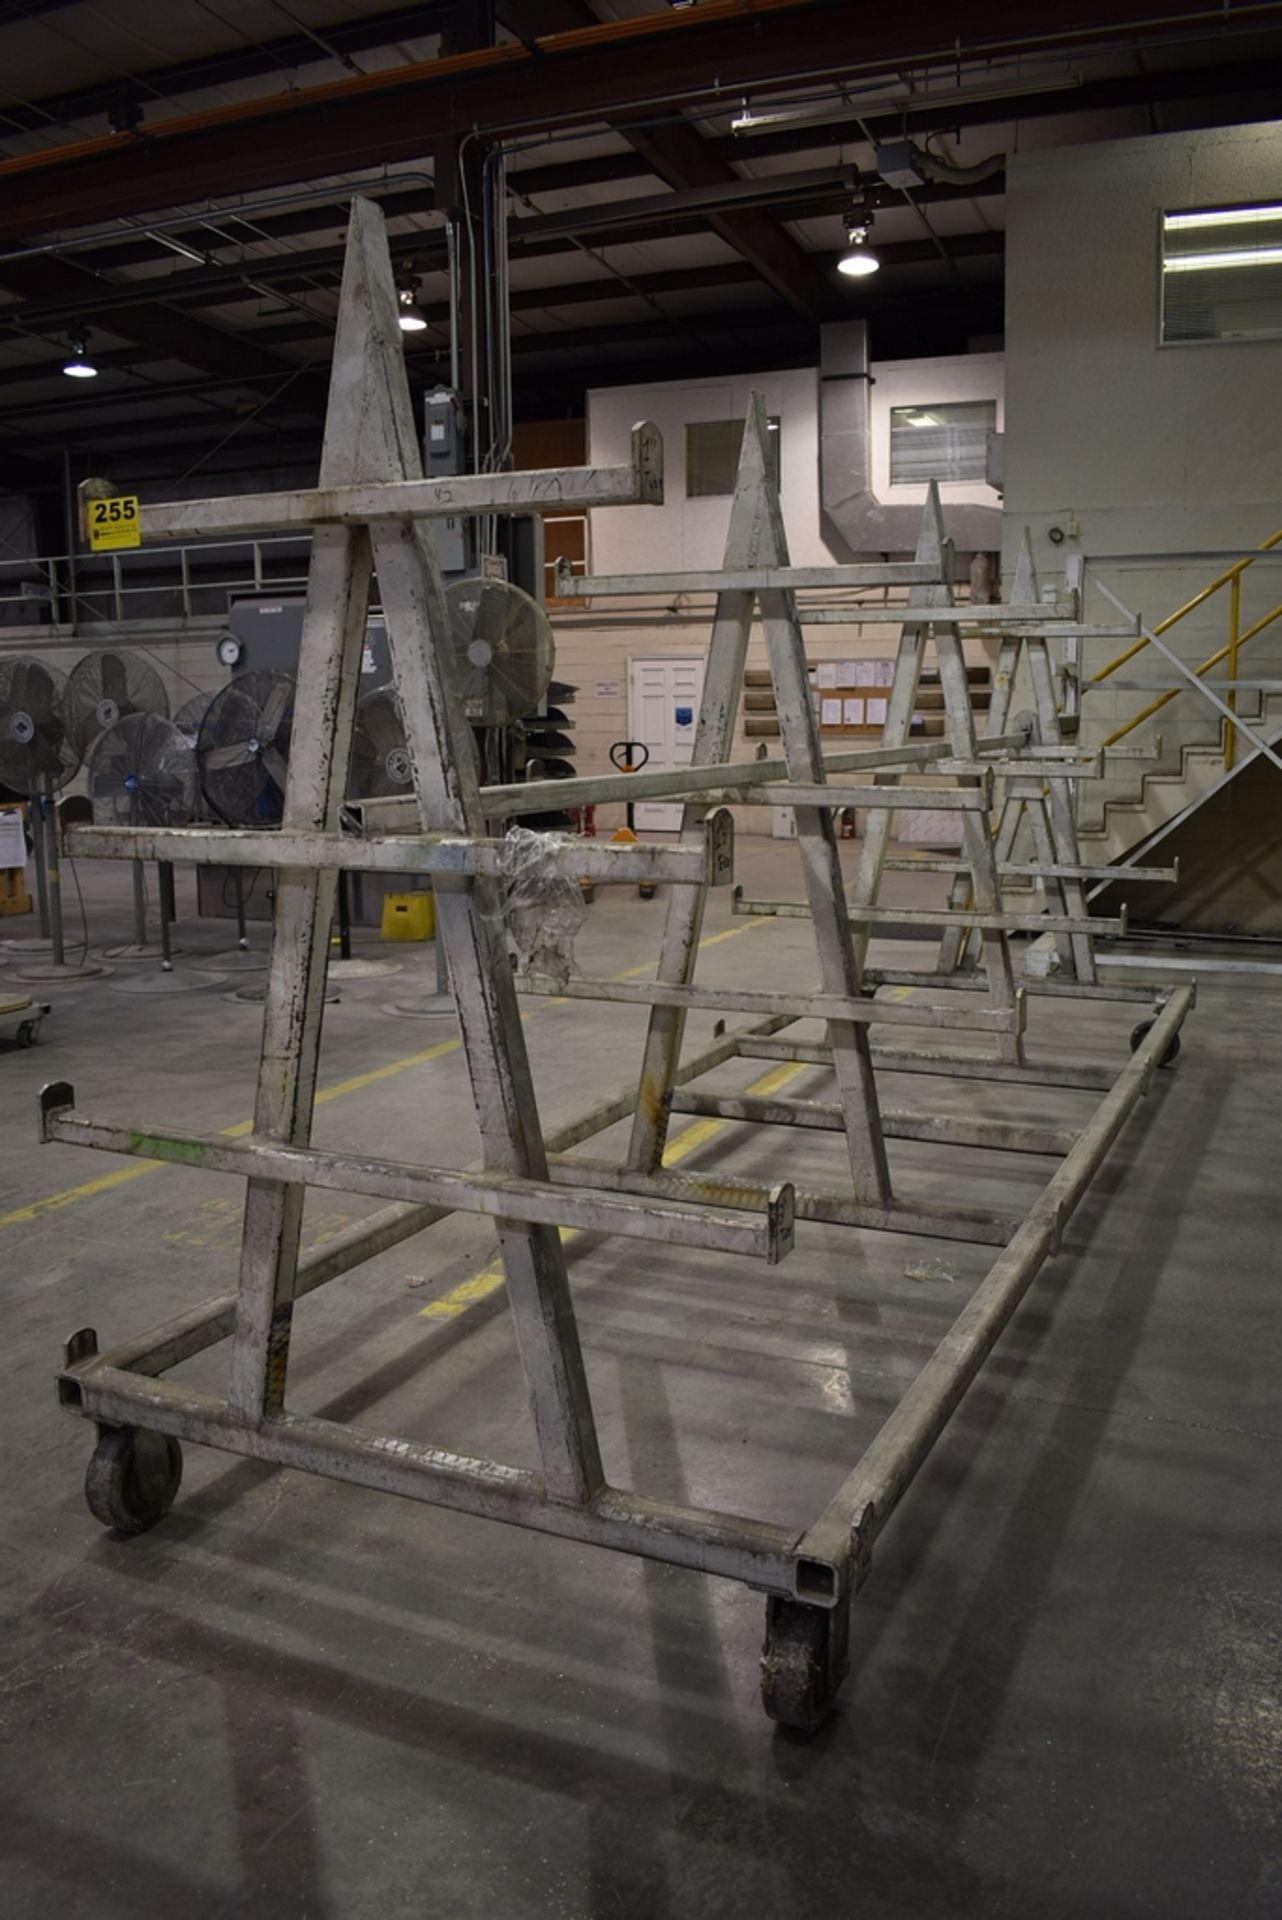 PORTABLE STEEL A-FRAME RACK, 16'L X 89" H - Image 3 of 3